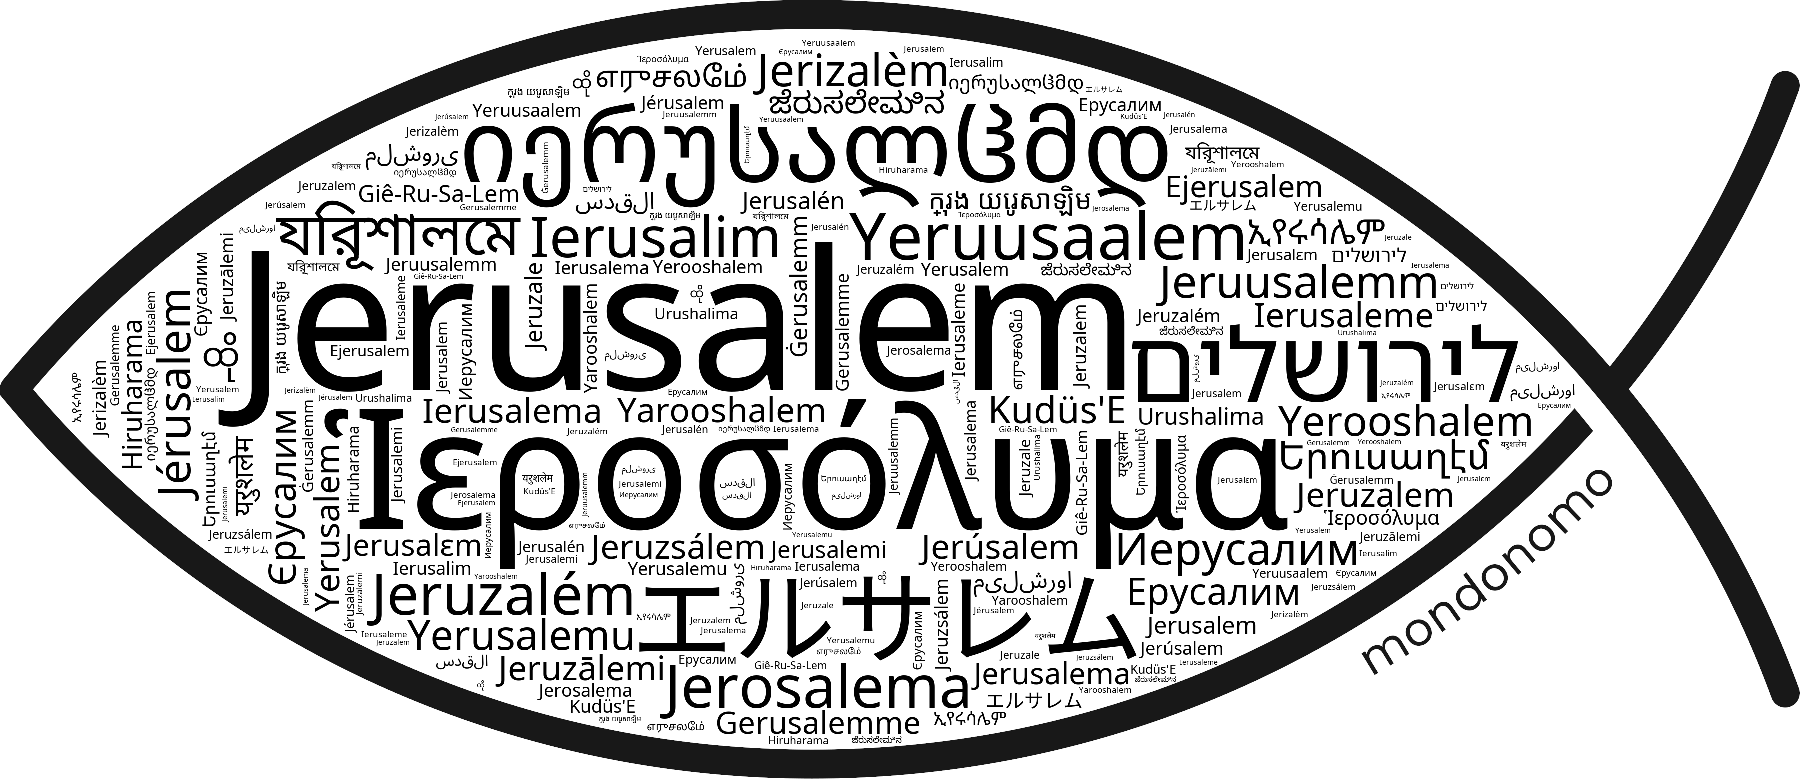 Name Jerusalem in the world's Bibles